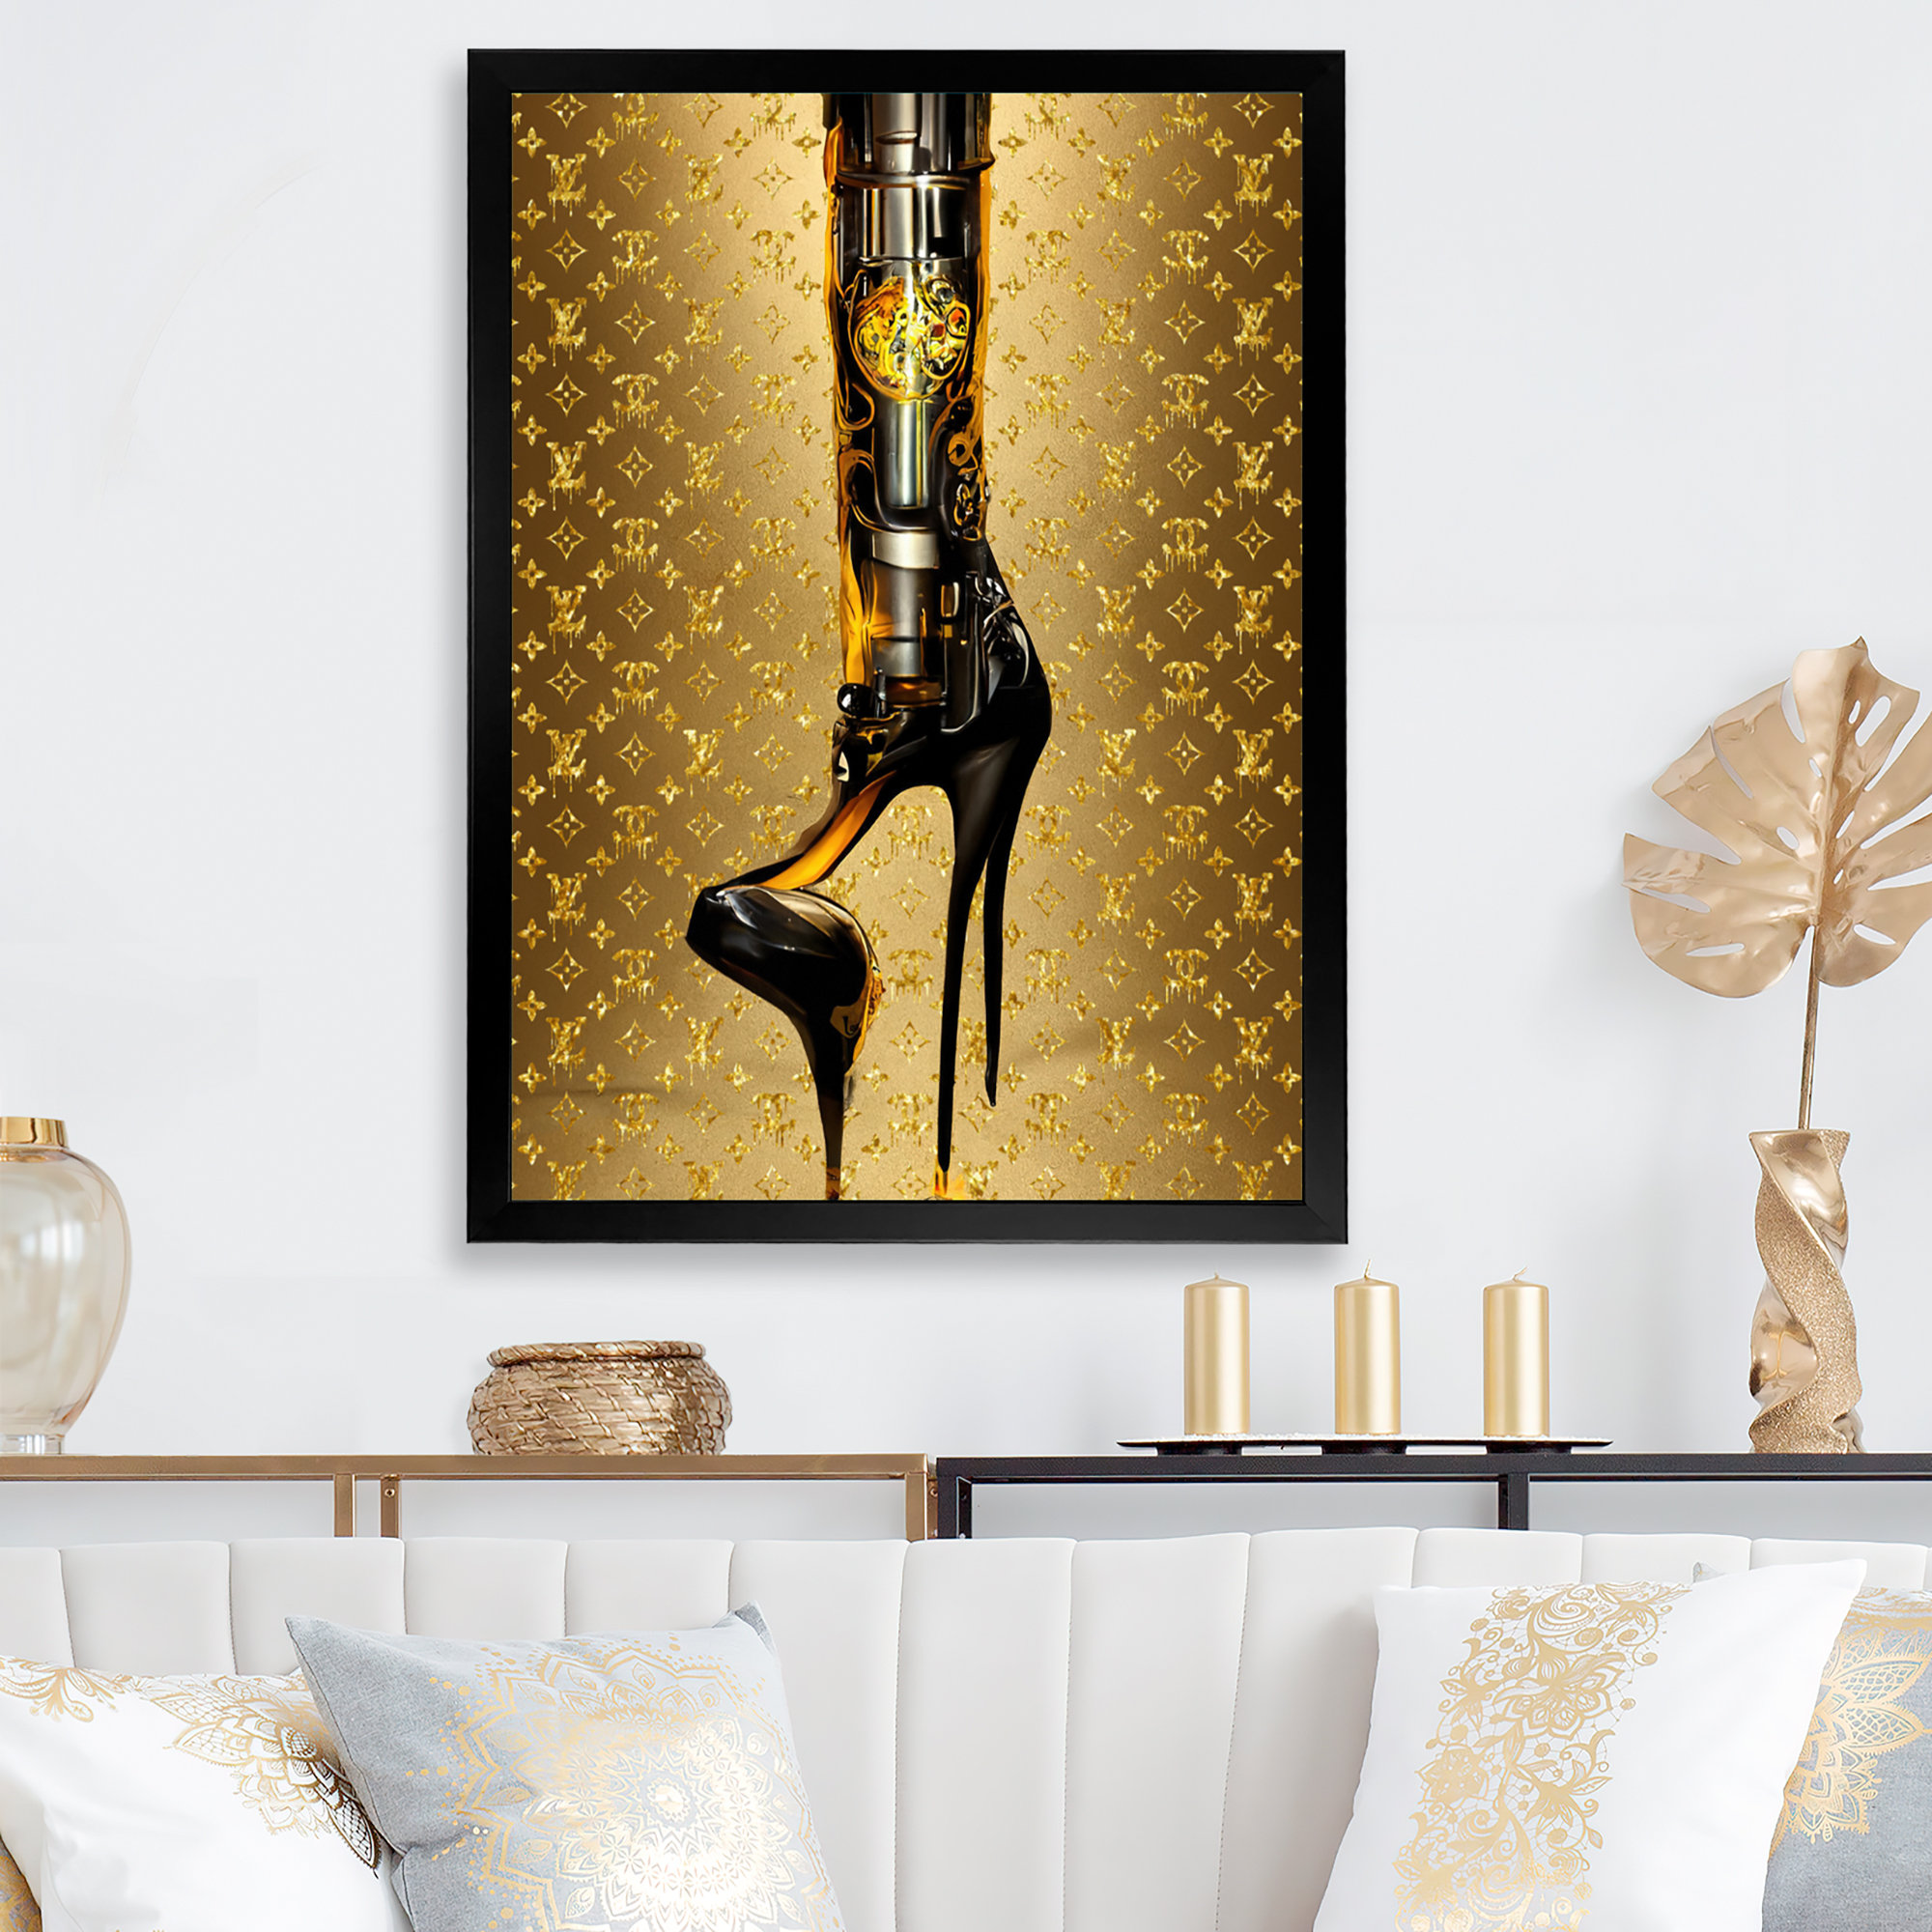 Luxury Brand Bionic Heel V - Fashion Canvas Wall Art House of Hampton Size: 12 W x 20 H, Format: Gold Picture Framed